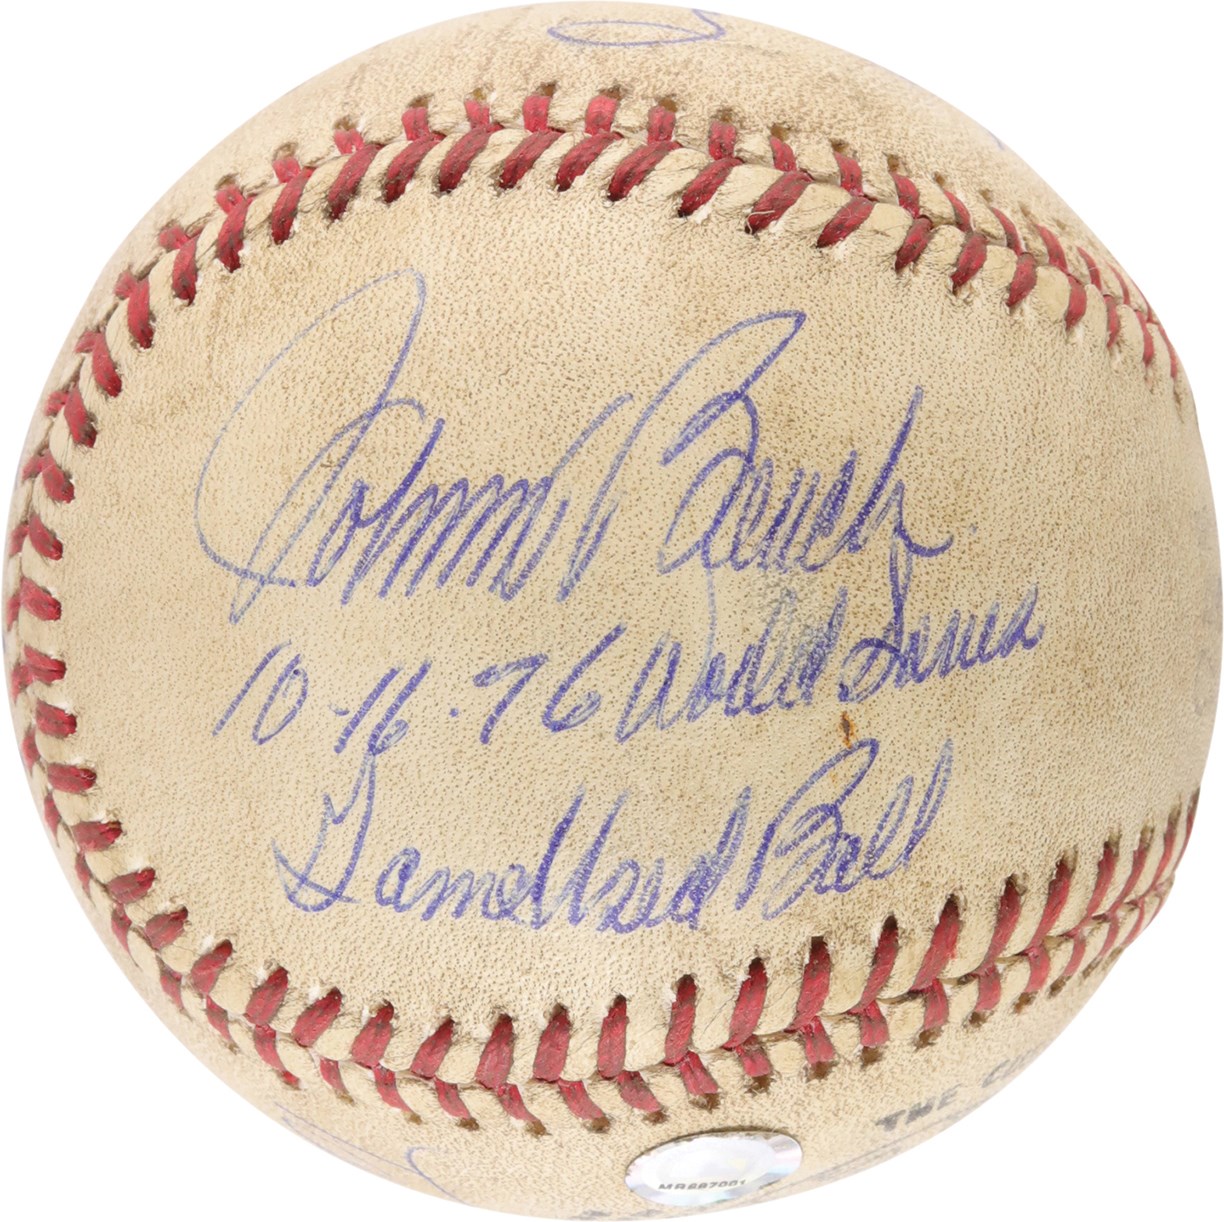 - 1976 World Series Game 1 Cincinnati Reds Multi-Signed Game Used Baseball w/Inscriptions (MEARS)